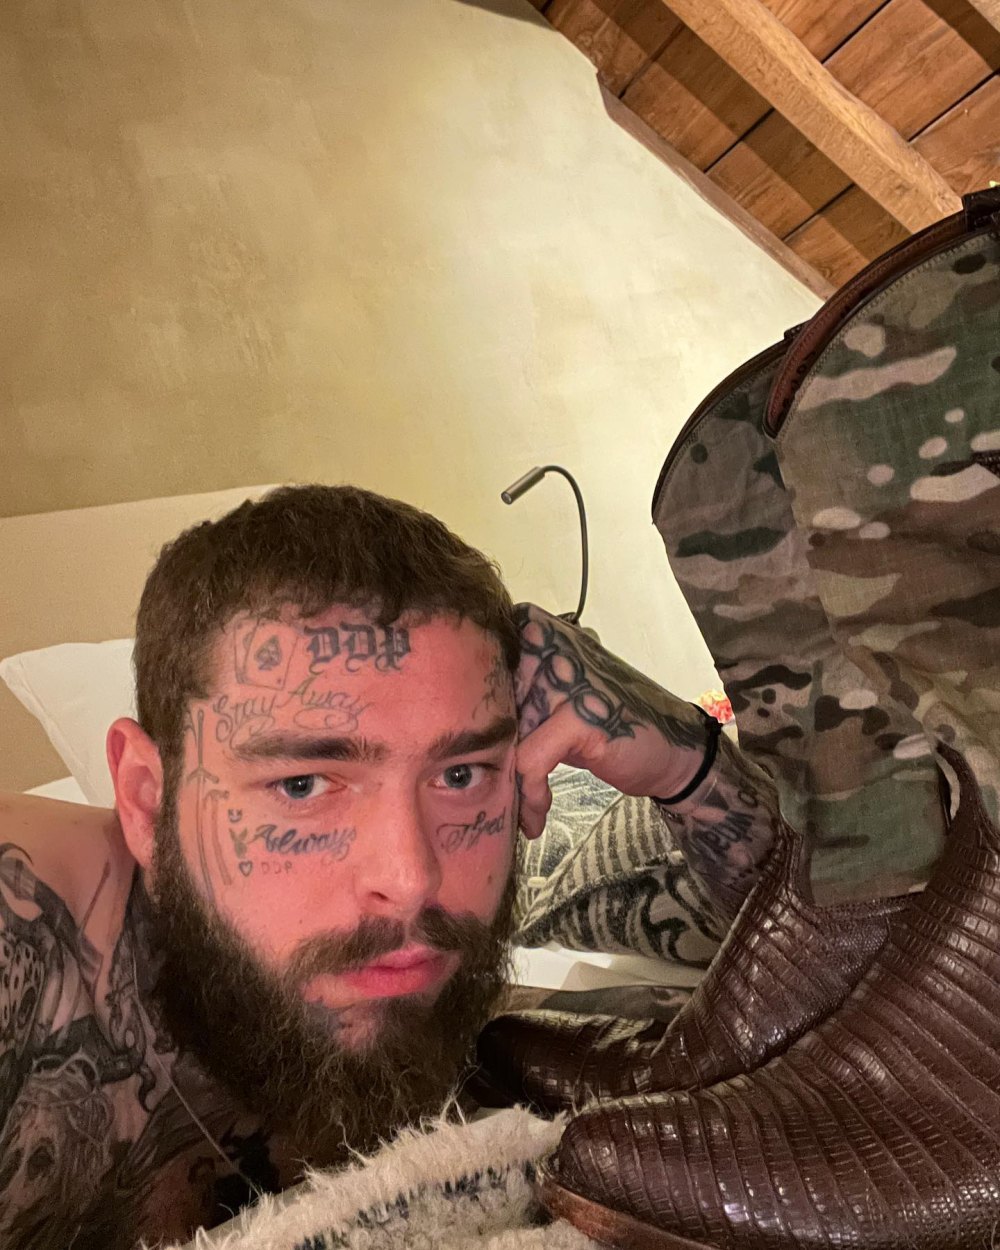 Post Malone Says He's 'Never Felt Healthier' After Recent Weight Loss, Denies Drug Use Speculation